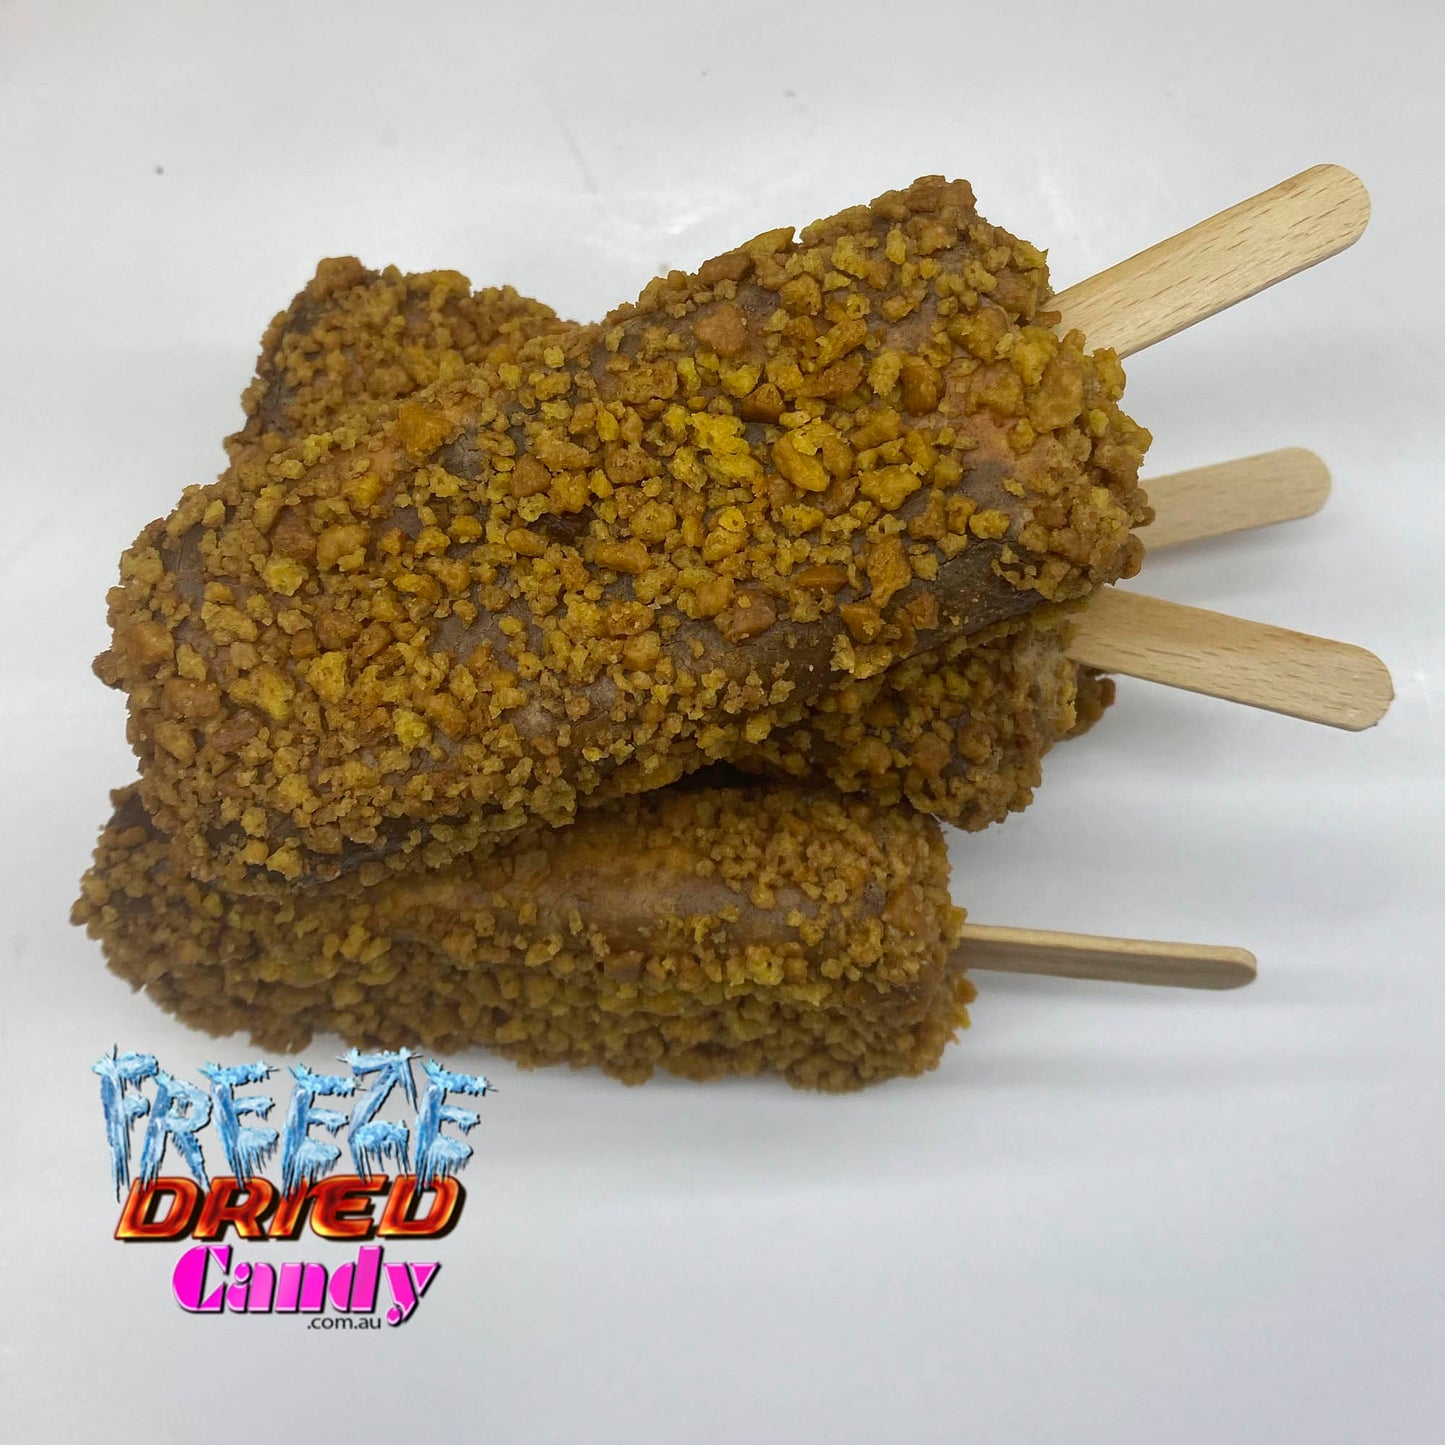 Freeze Dried Ice Cream - Golden Gaytime - Violet Crumble- Freeze Dried Candy Lollies